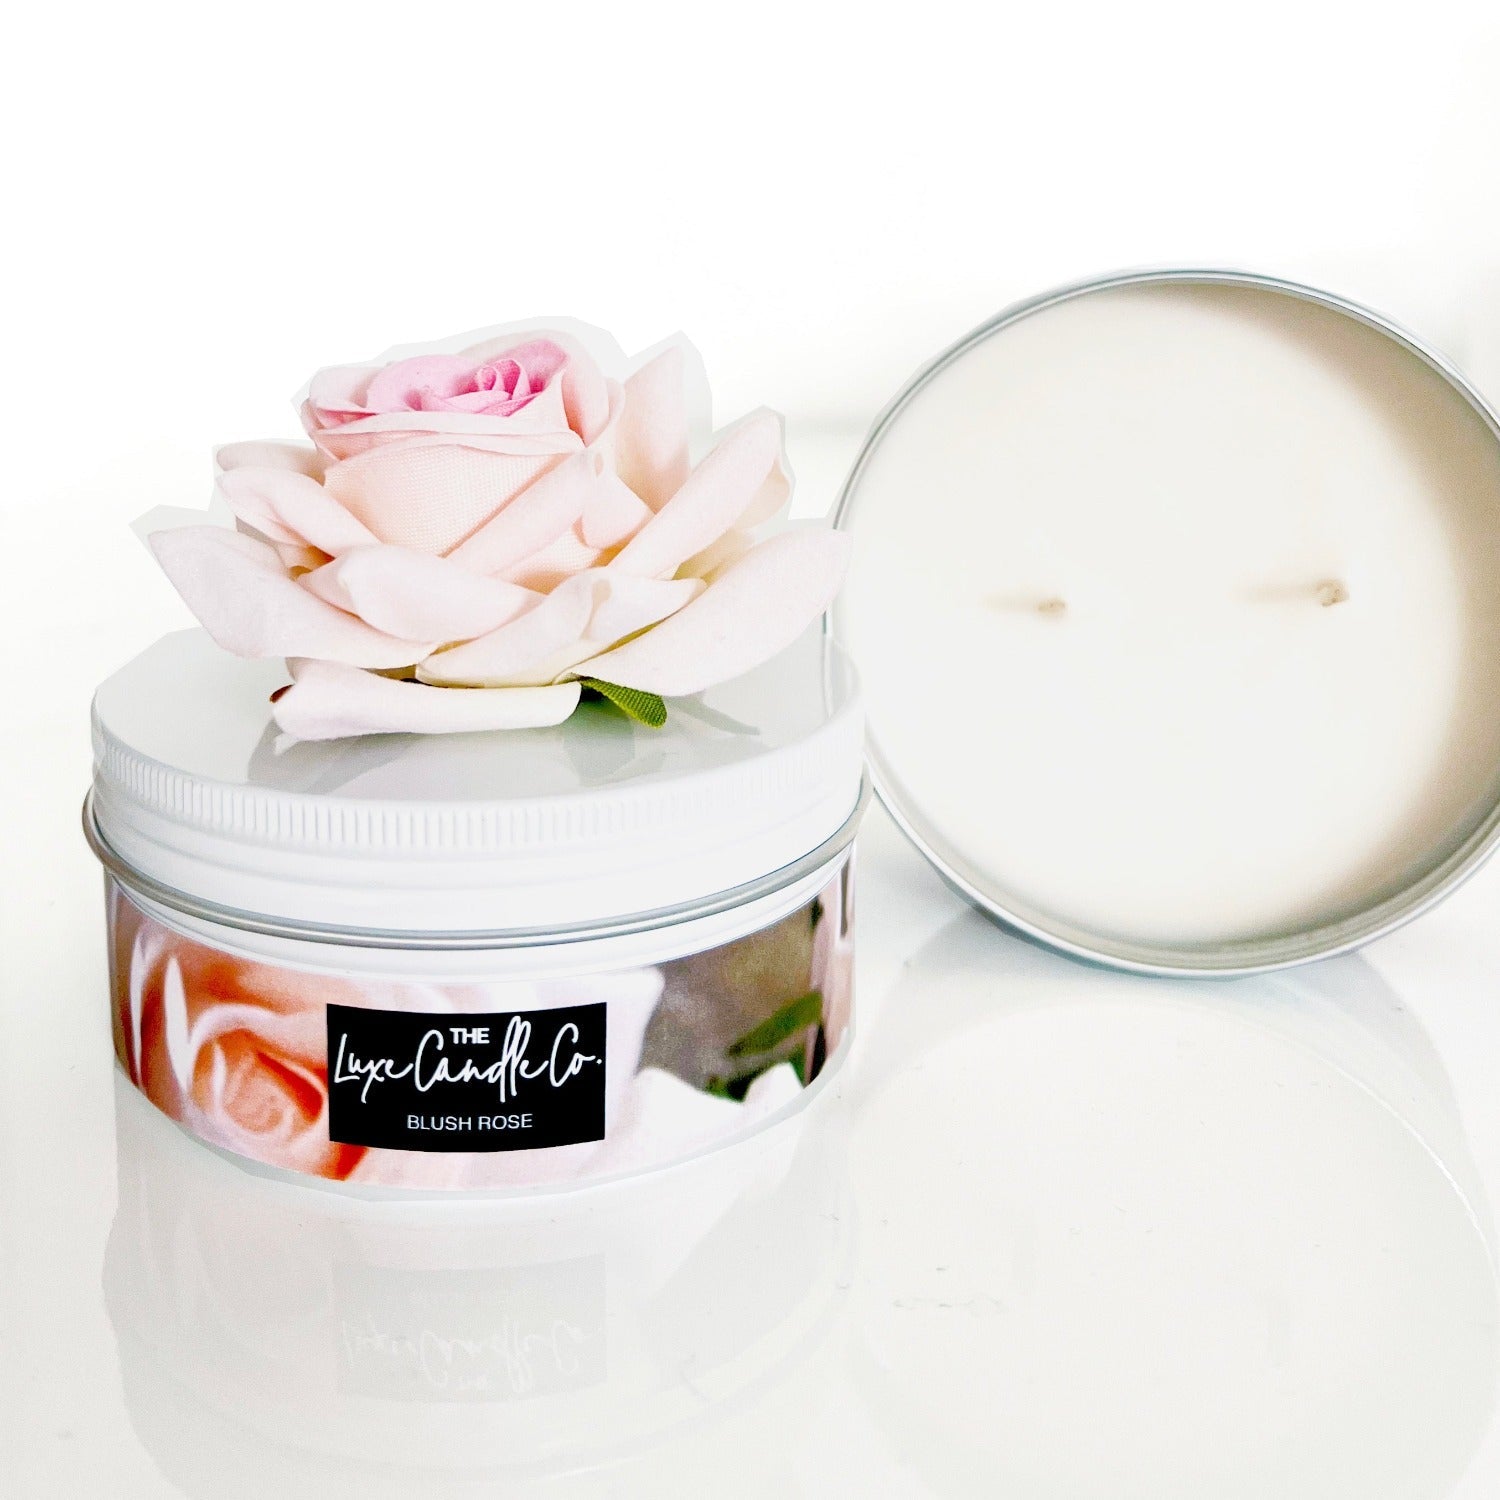 blush rose scented candle in tin